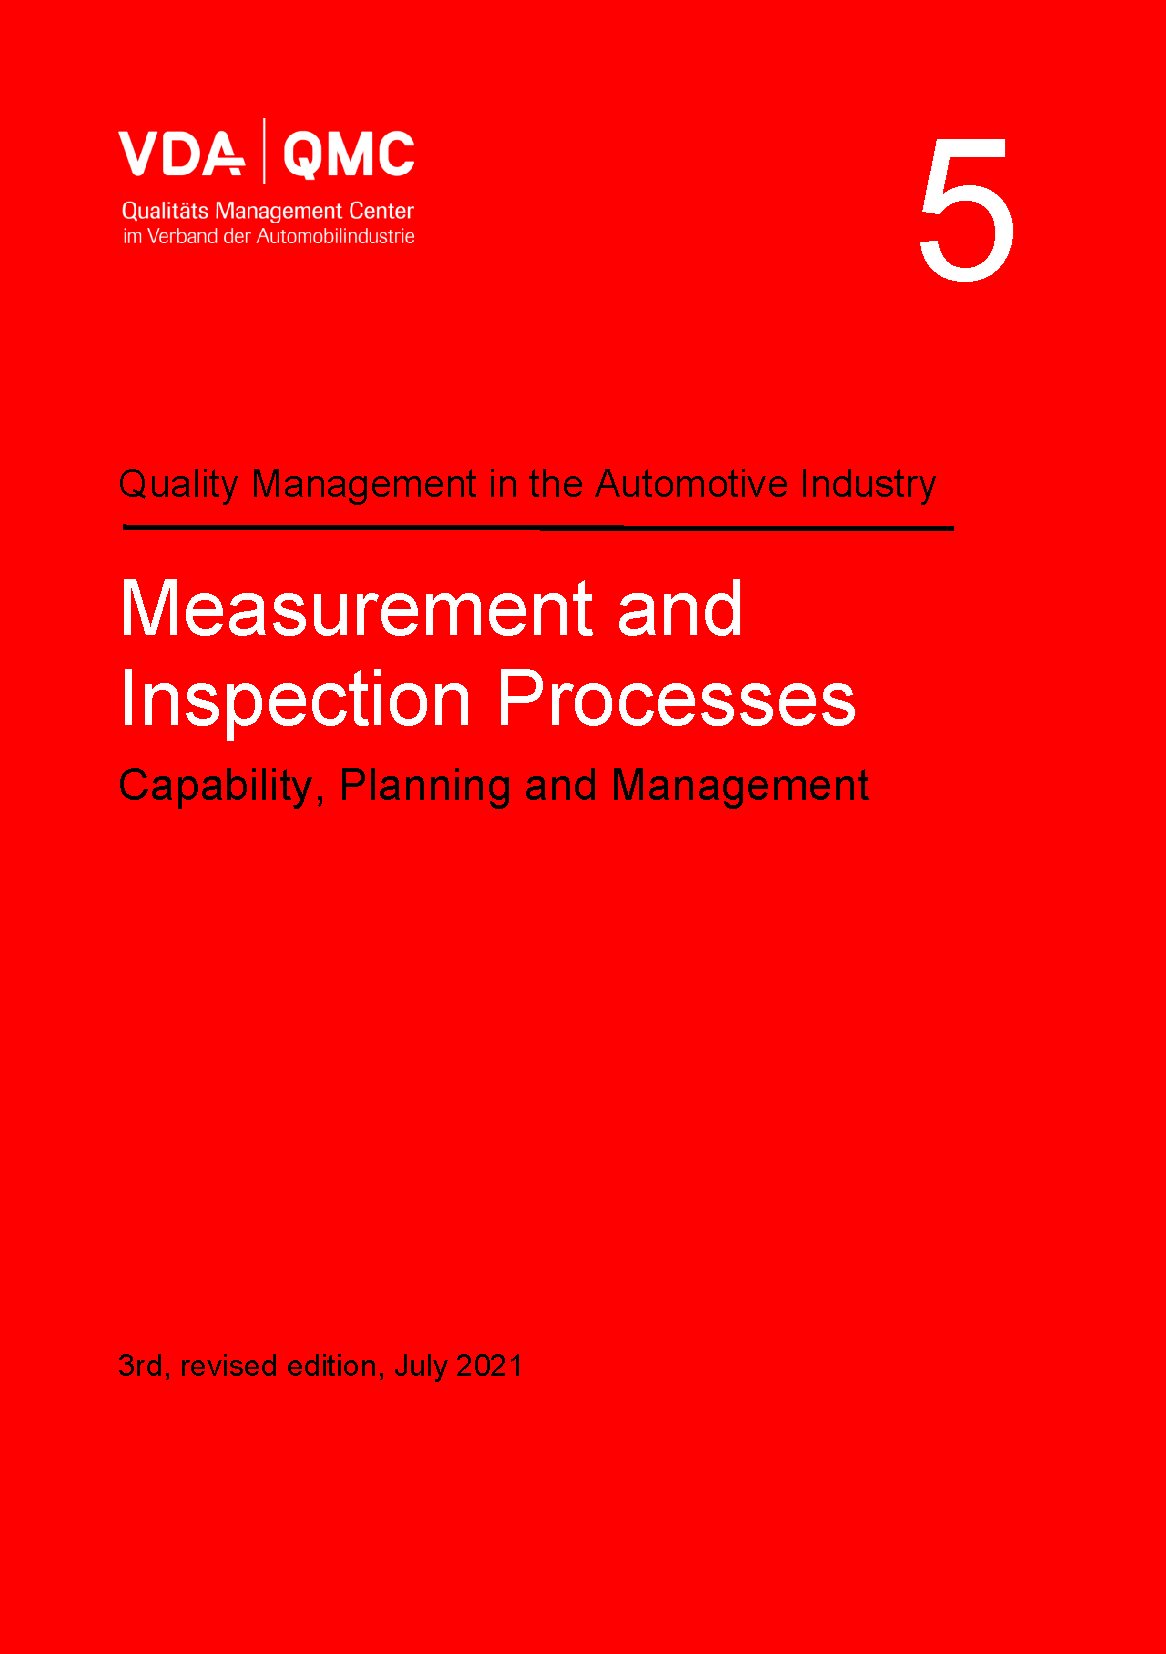 Publikace  VDA Volume 5 Measurement and Inspection Processes.
 Capability, Planning and Management, 3rd revised edition, July 2021 1.7.2021 náhled